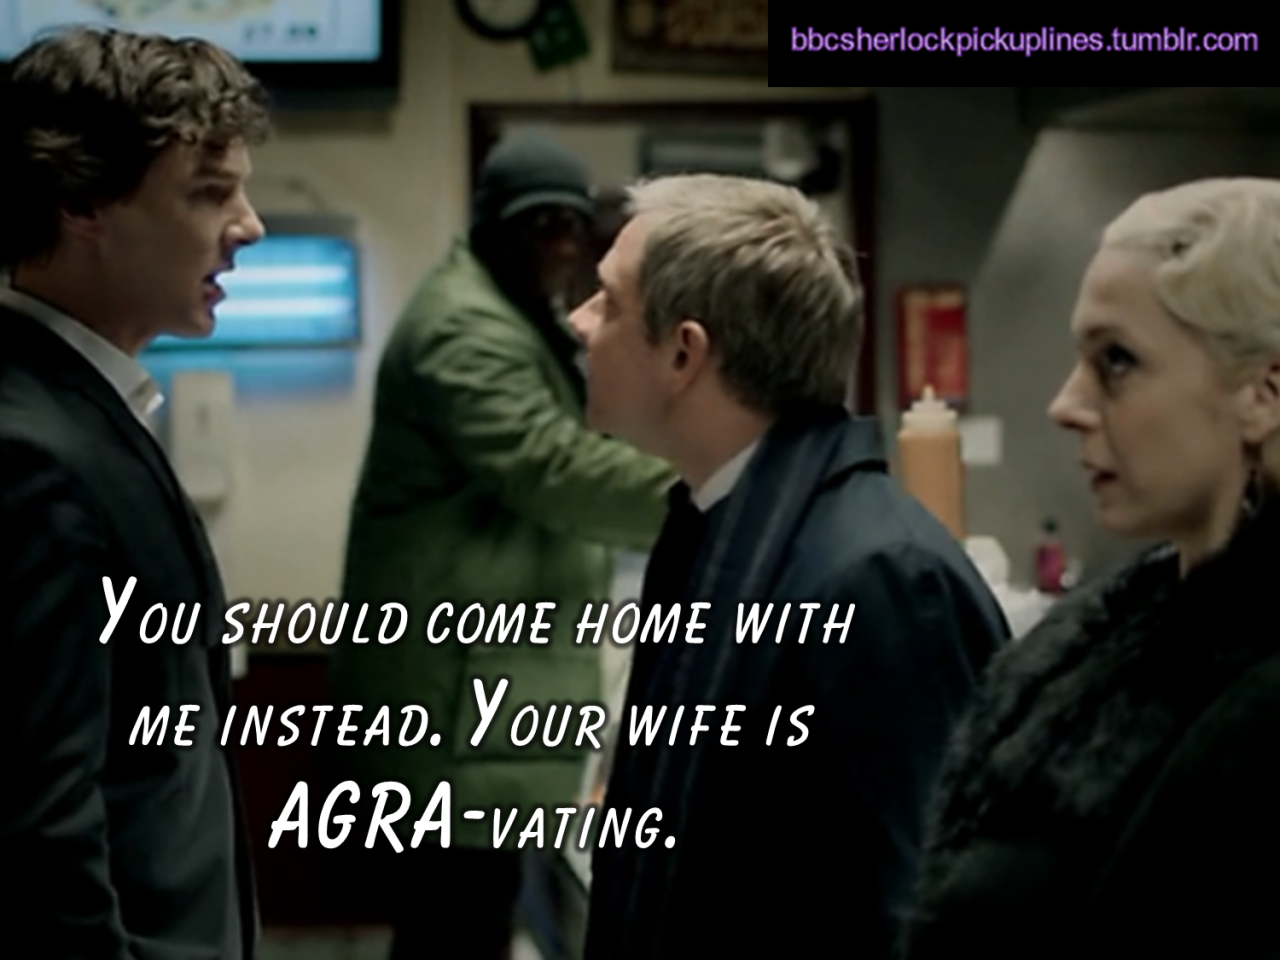 &ldquo;You should come home with me instead. Your wife is AGRA-vating.&rdquo;